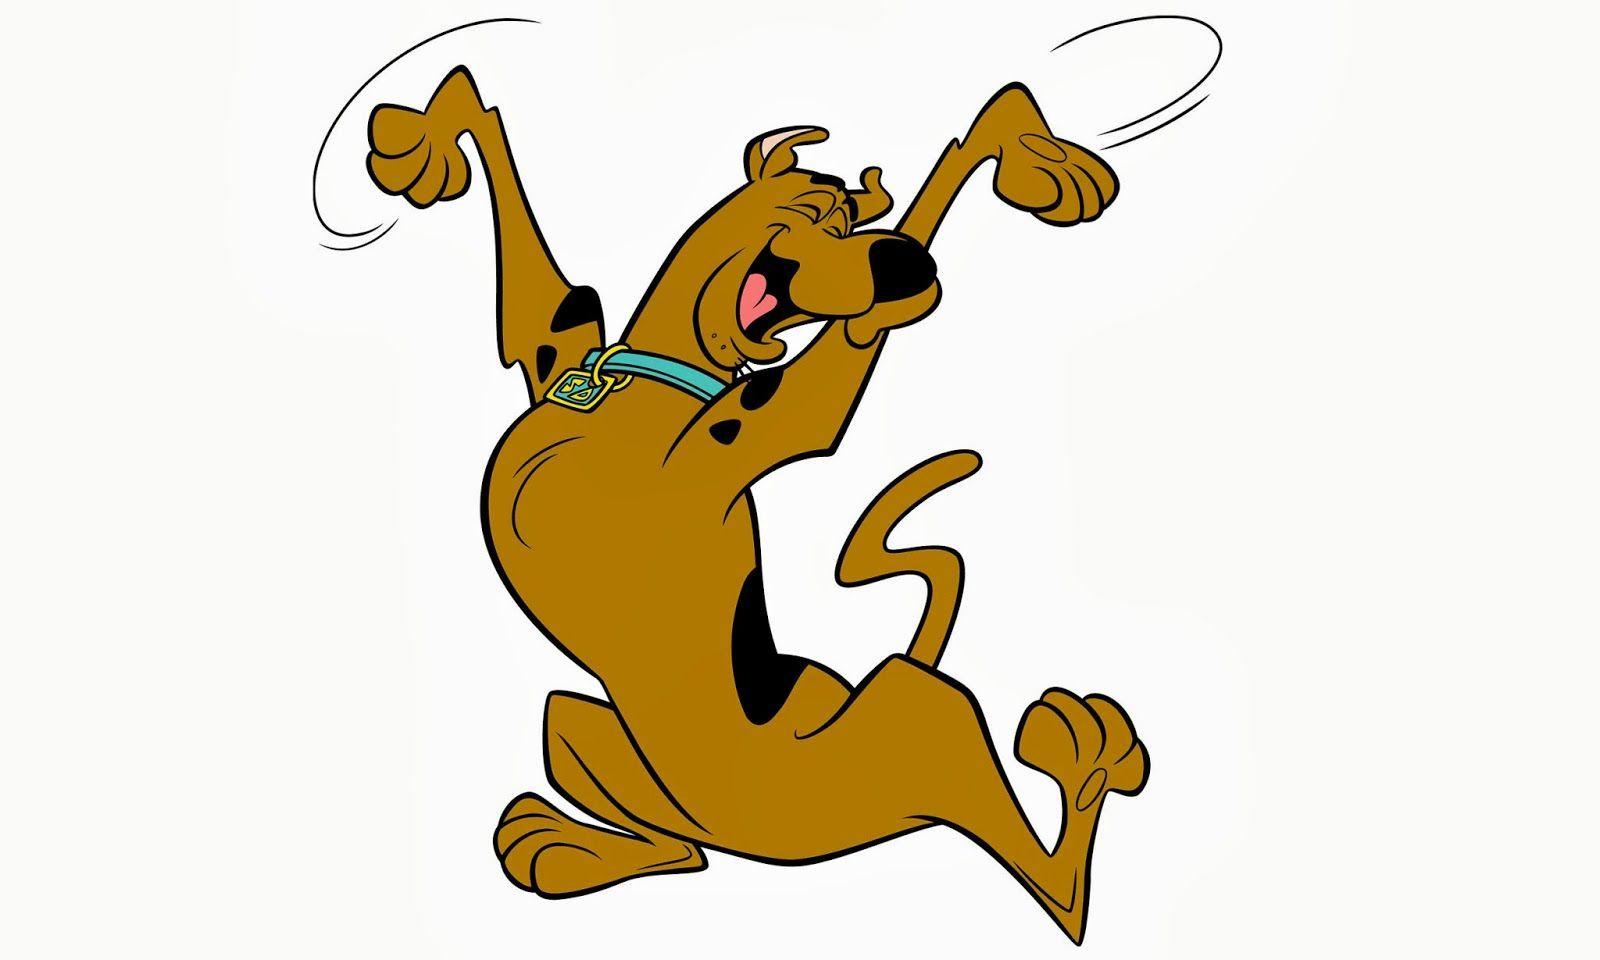 Scooby doo Picture Downloads Free for I Pad HD wallpaper